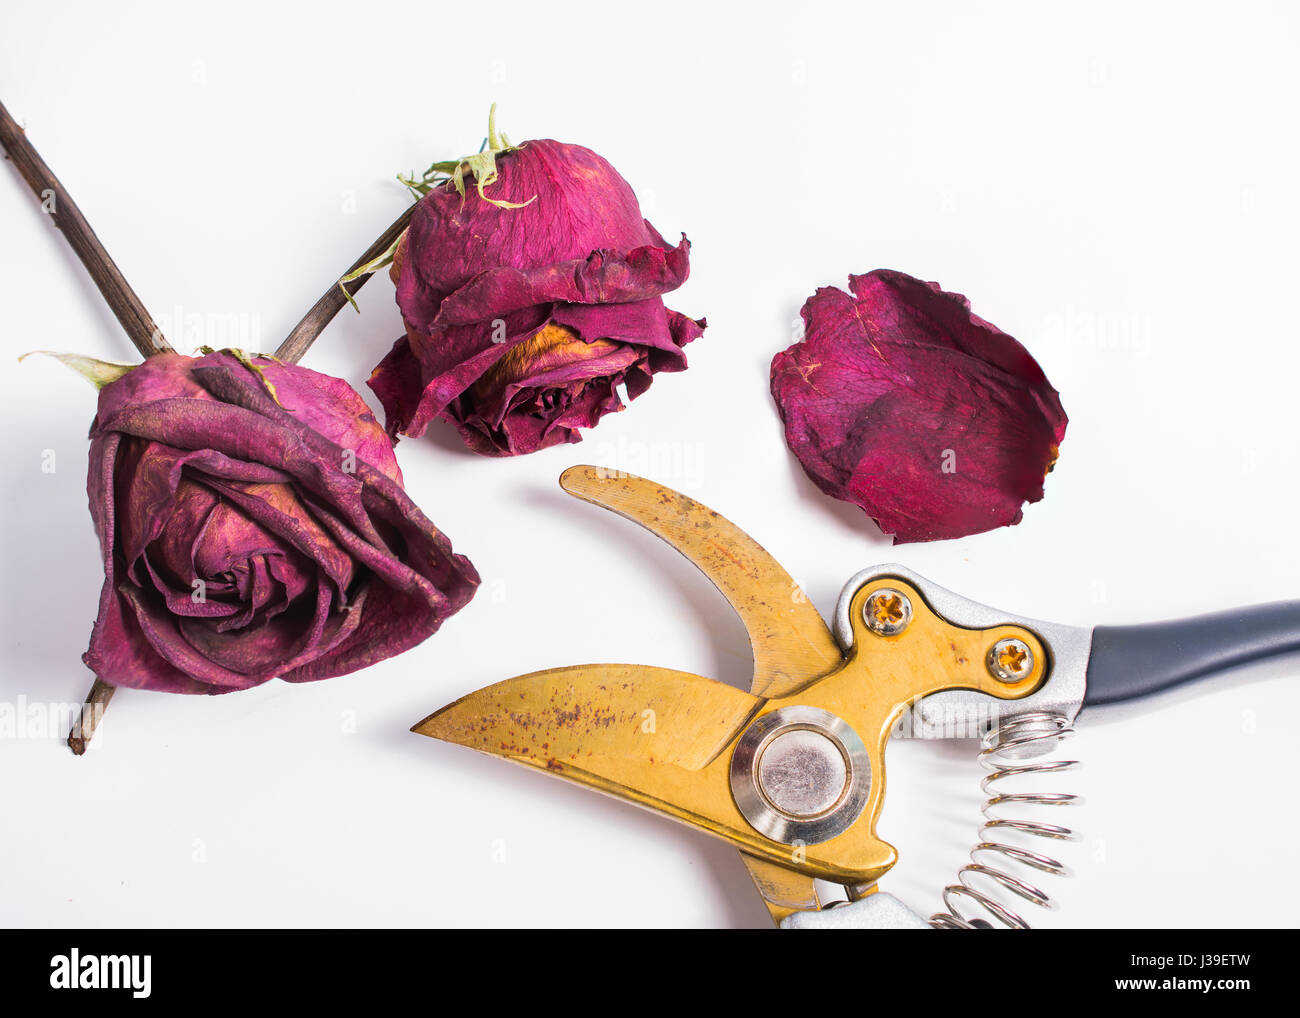 Dried roses laying next to an old pair of pruning shears Stock Photo